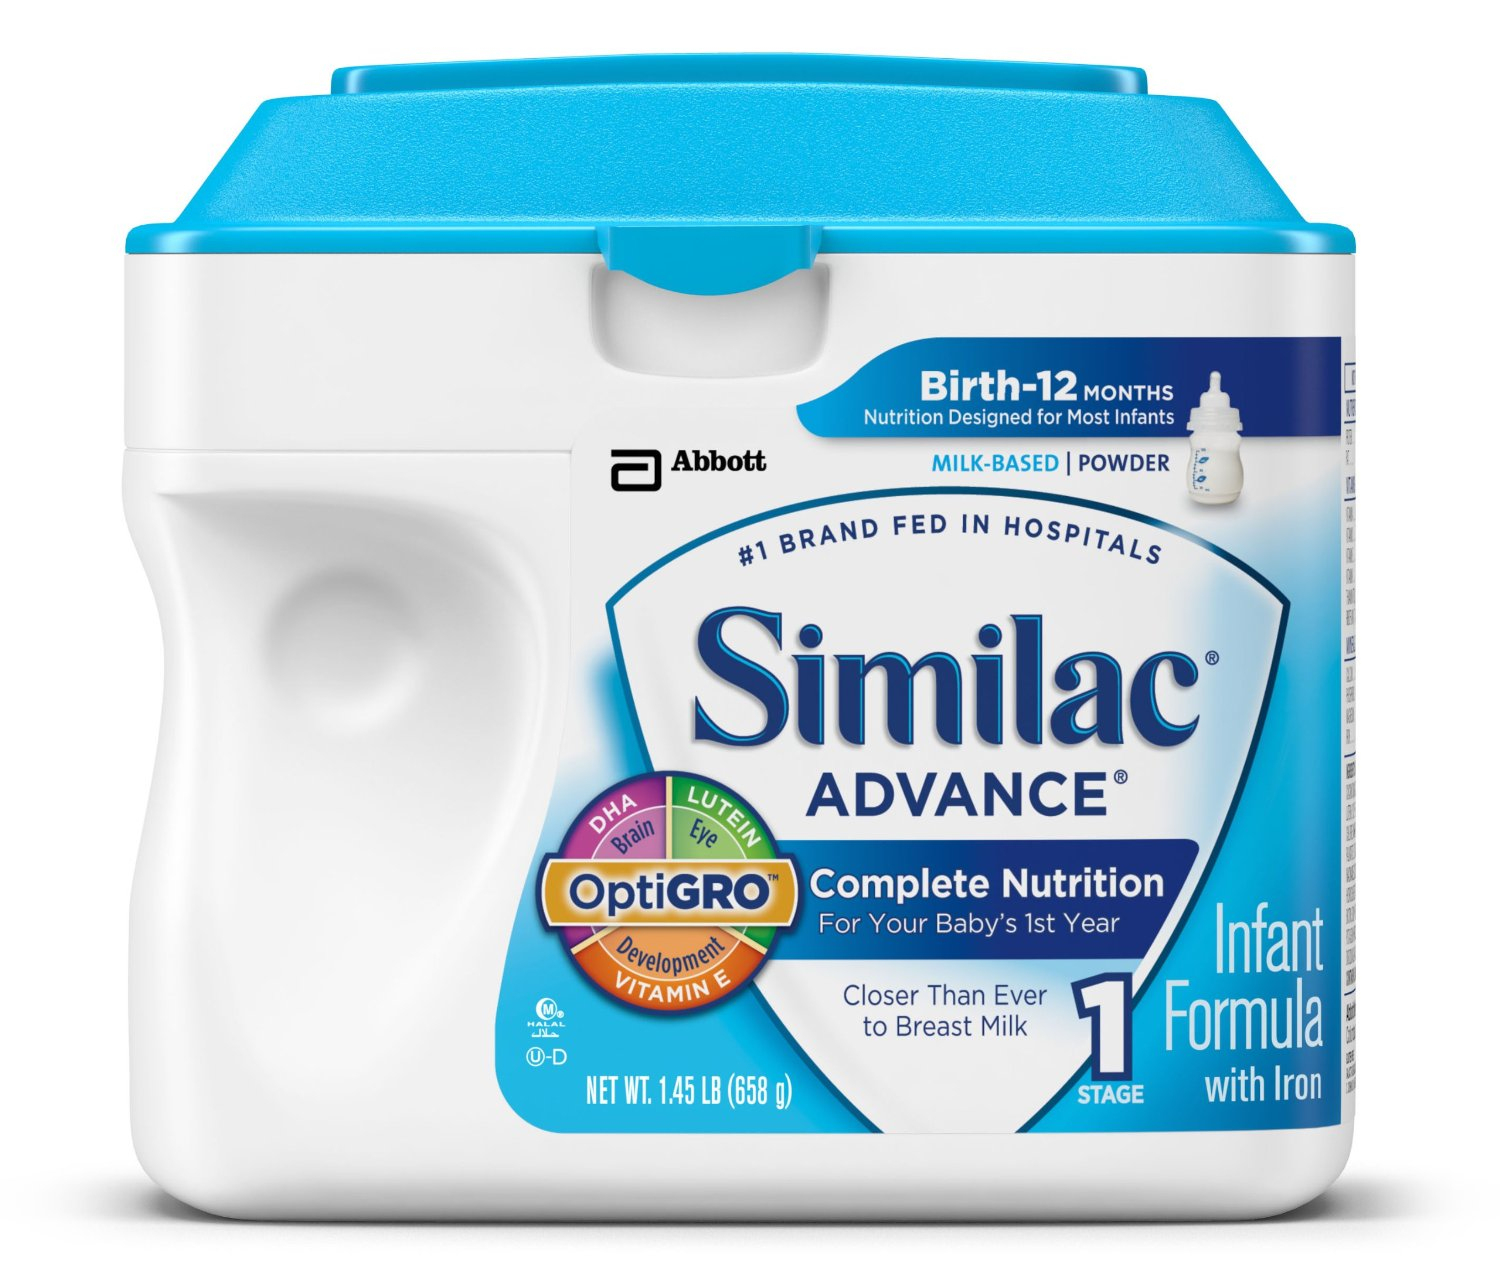 How To Get Coupons For Similac Baby Formula / Wcco Dining Out Deals - Free Printable Similac Sensitive Coupons